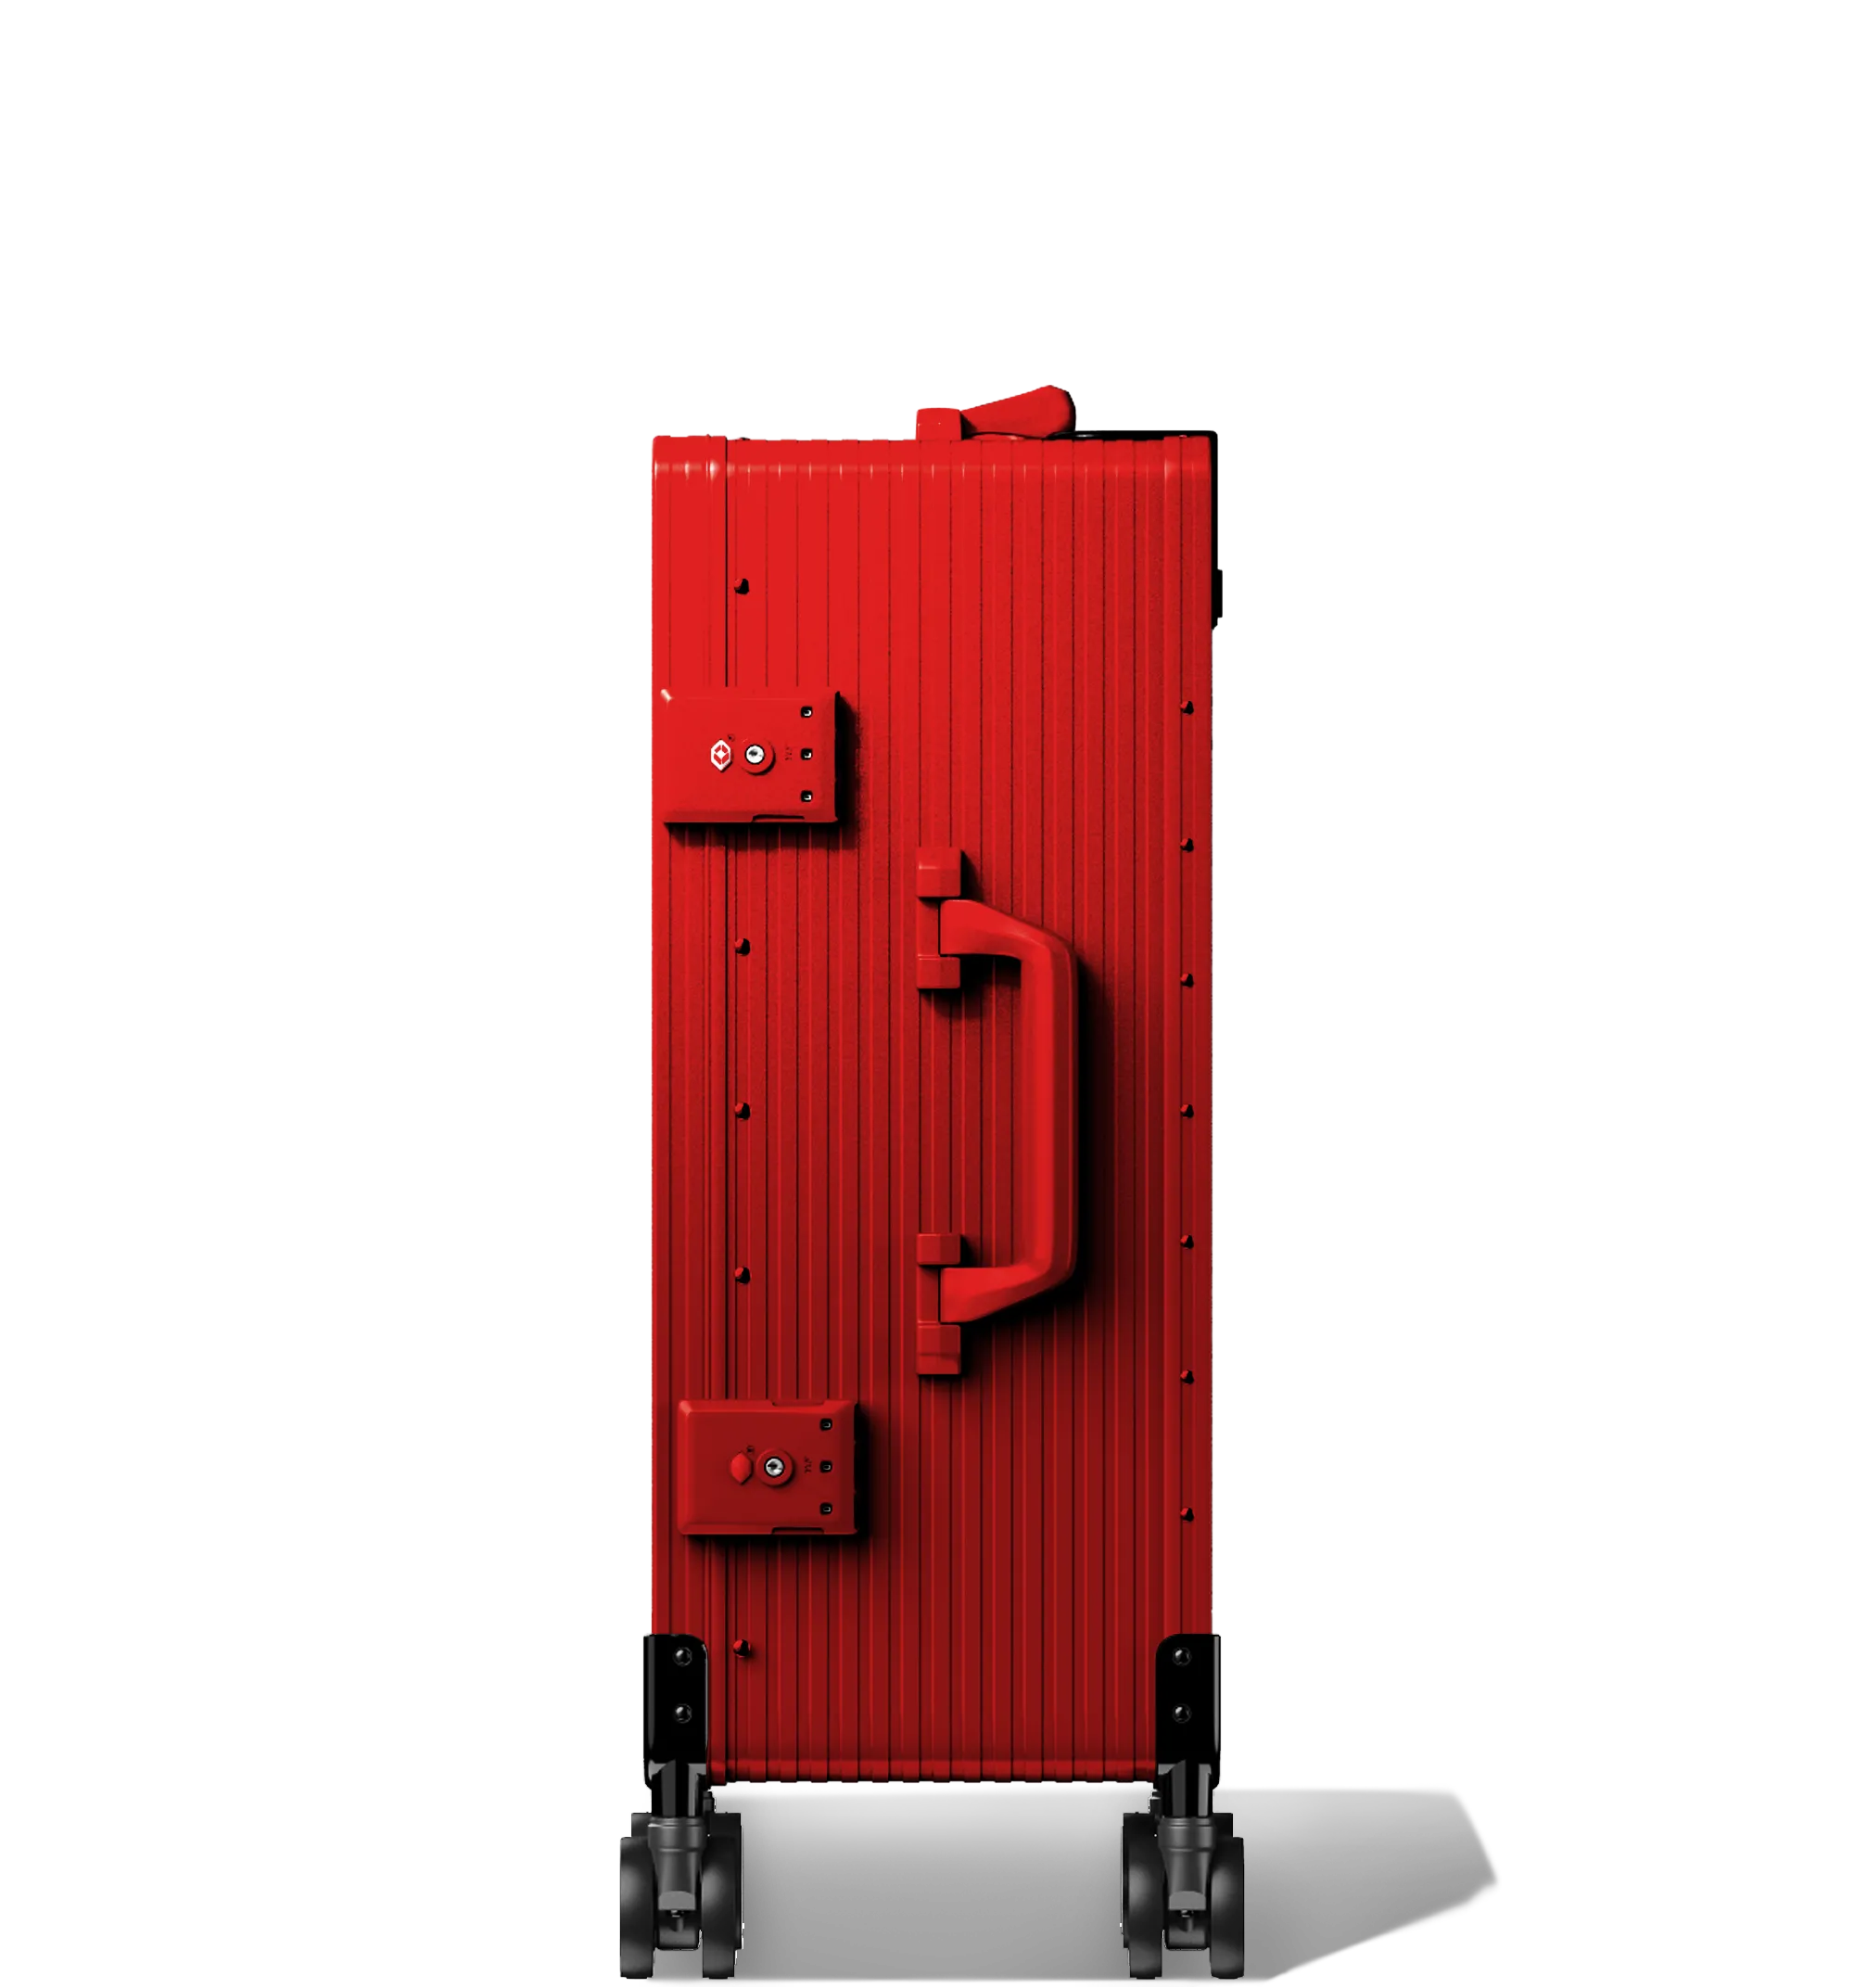 A red Cabin In 56/20 hard-shell aluminium Luggage standing upright with ribbed texture, side and top carry handles, two TSA-approved combination locks, and four spinning wheels, against a white background.